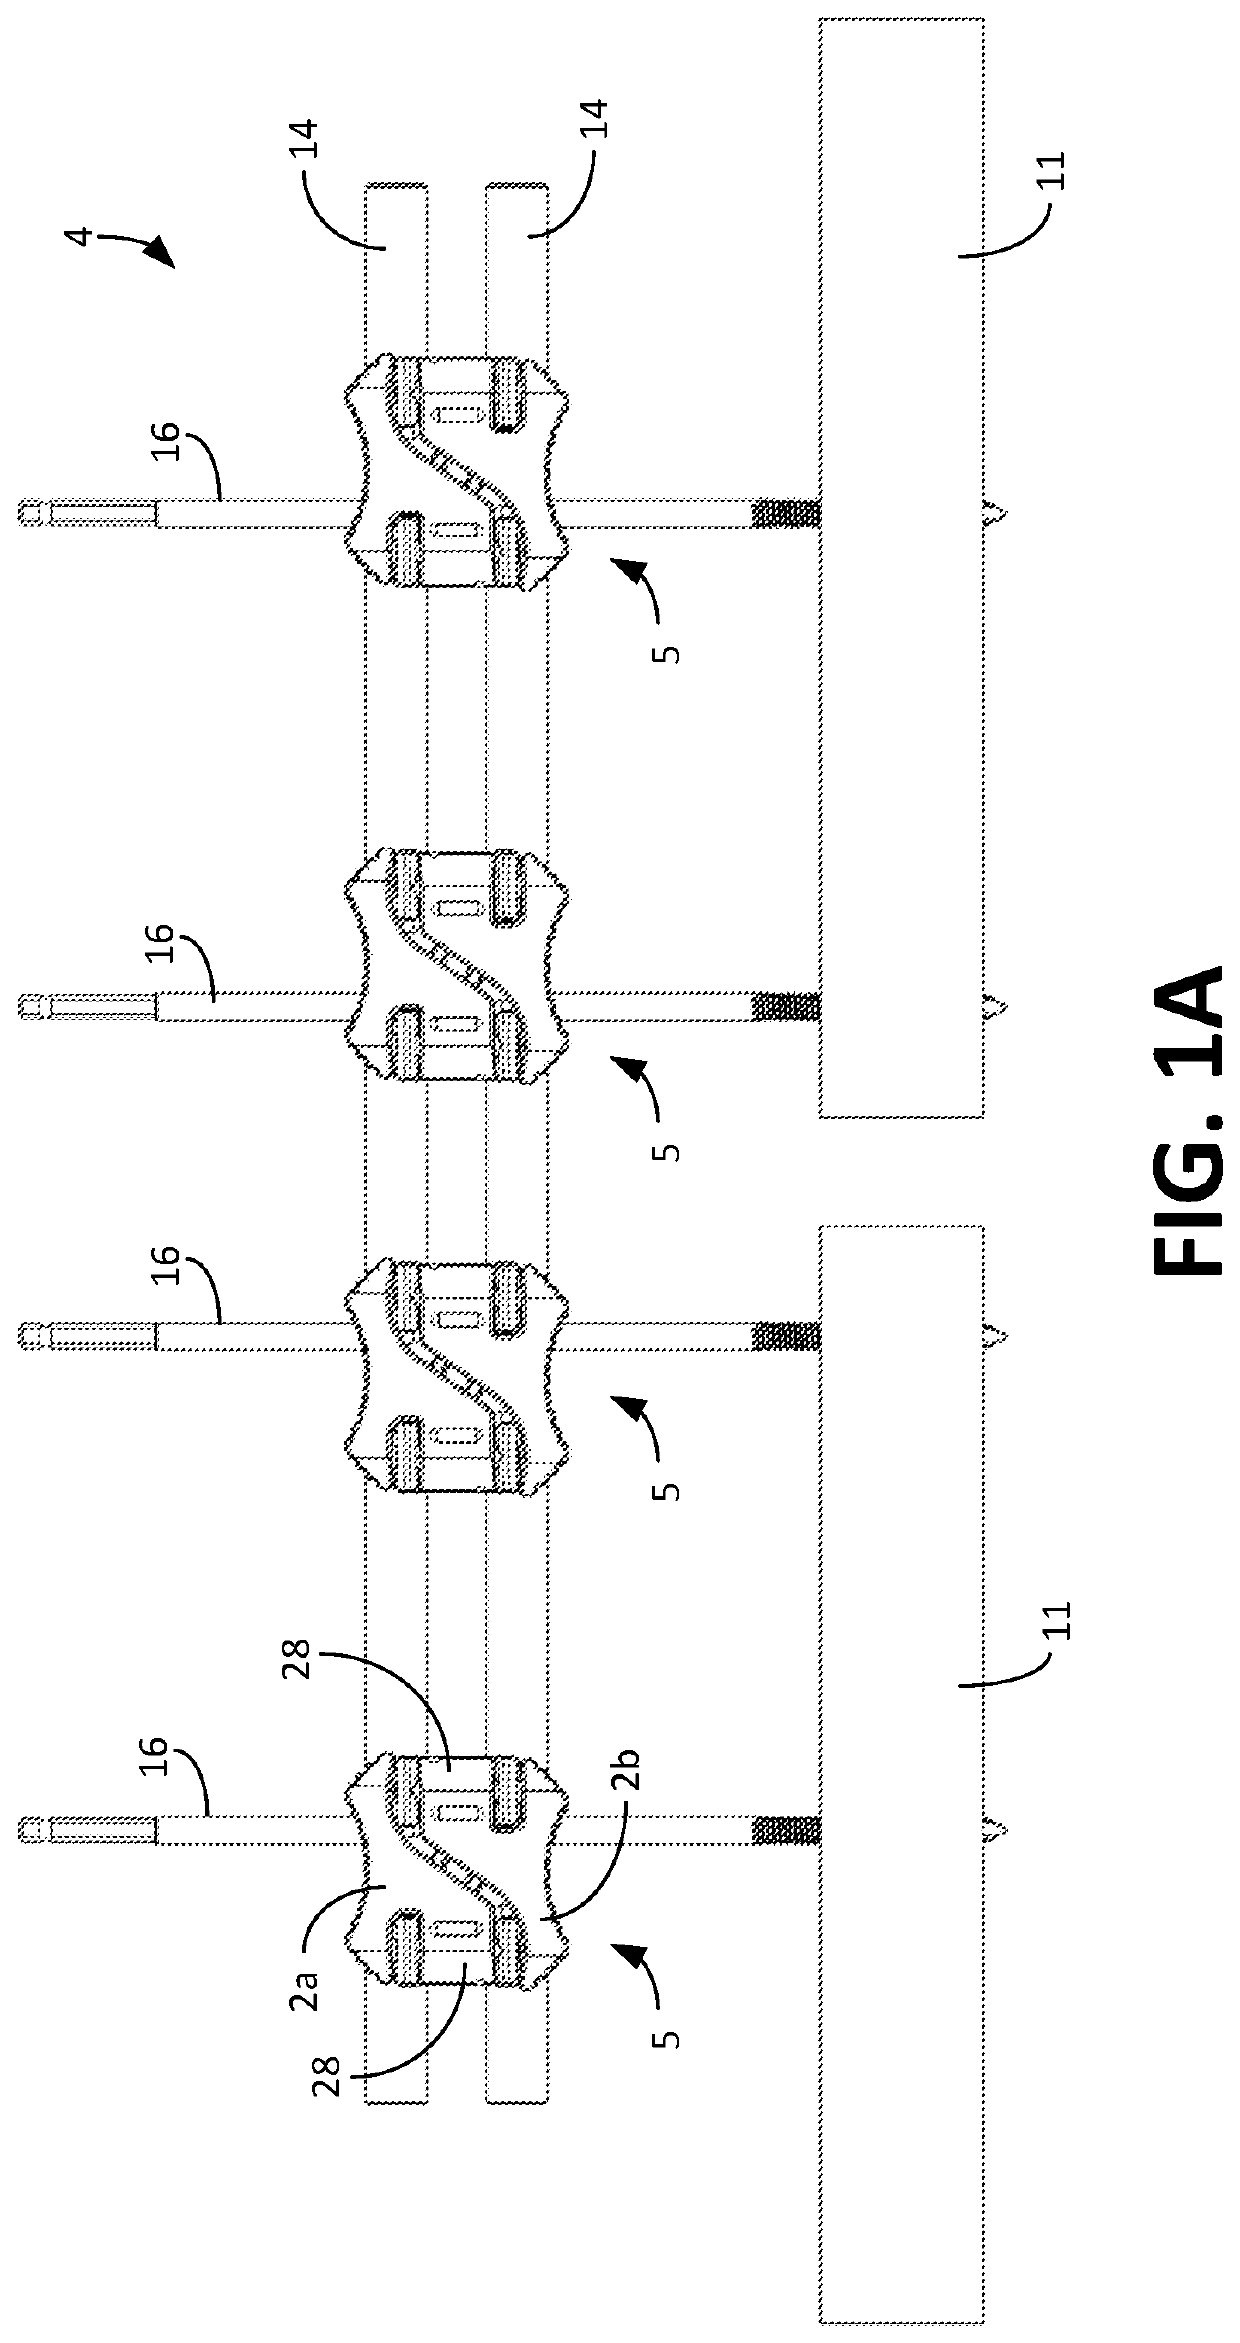 Universal clamp apparatus for bone fixation device